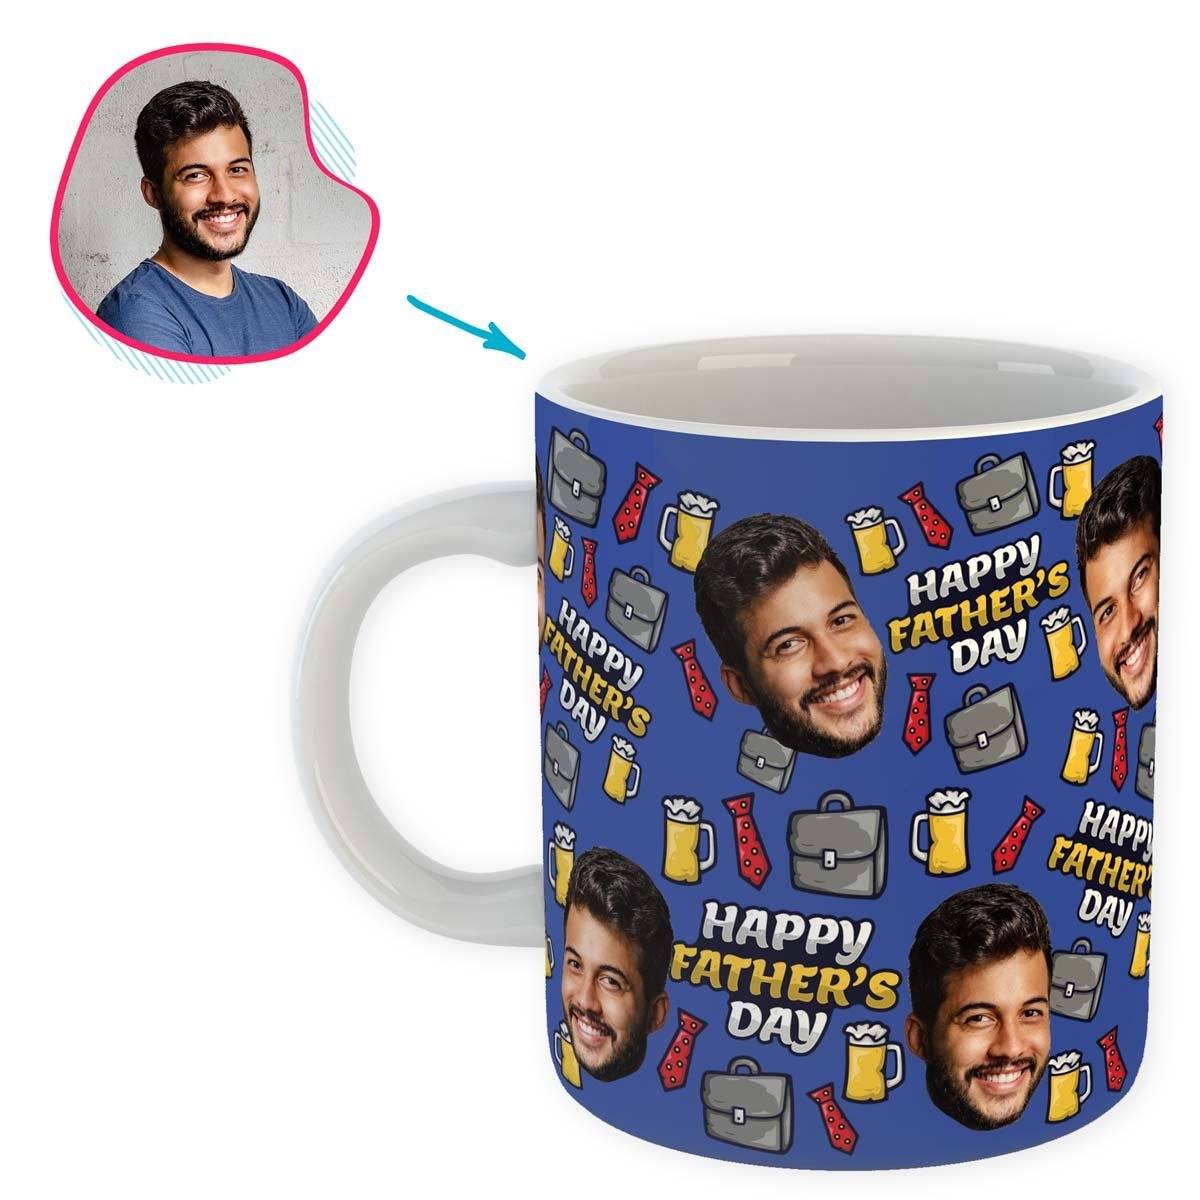 Darkblue Fathers Day personalized mug with photo of face printed on it